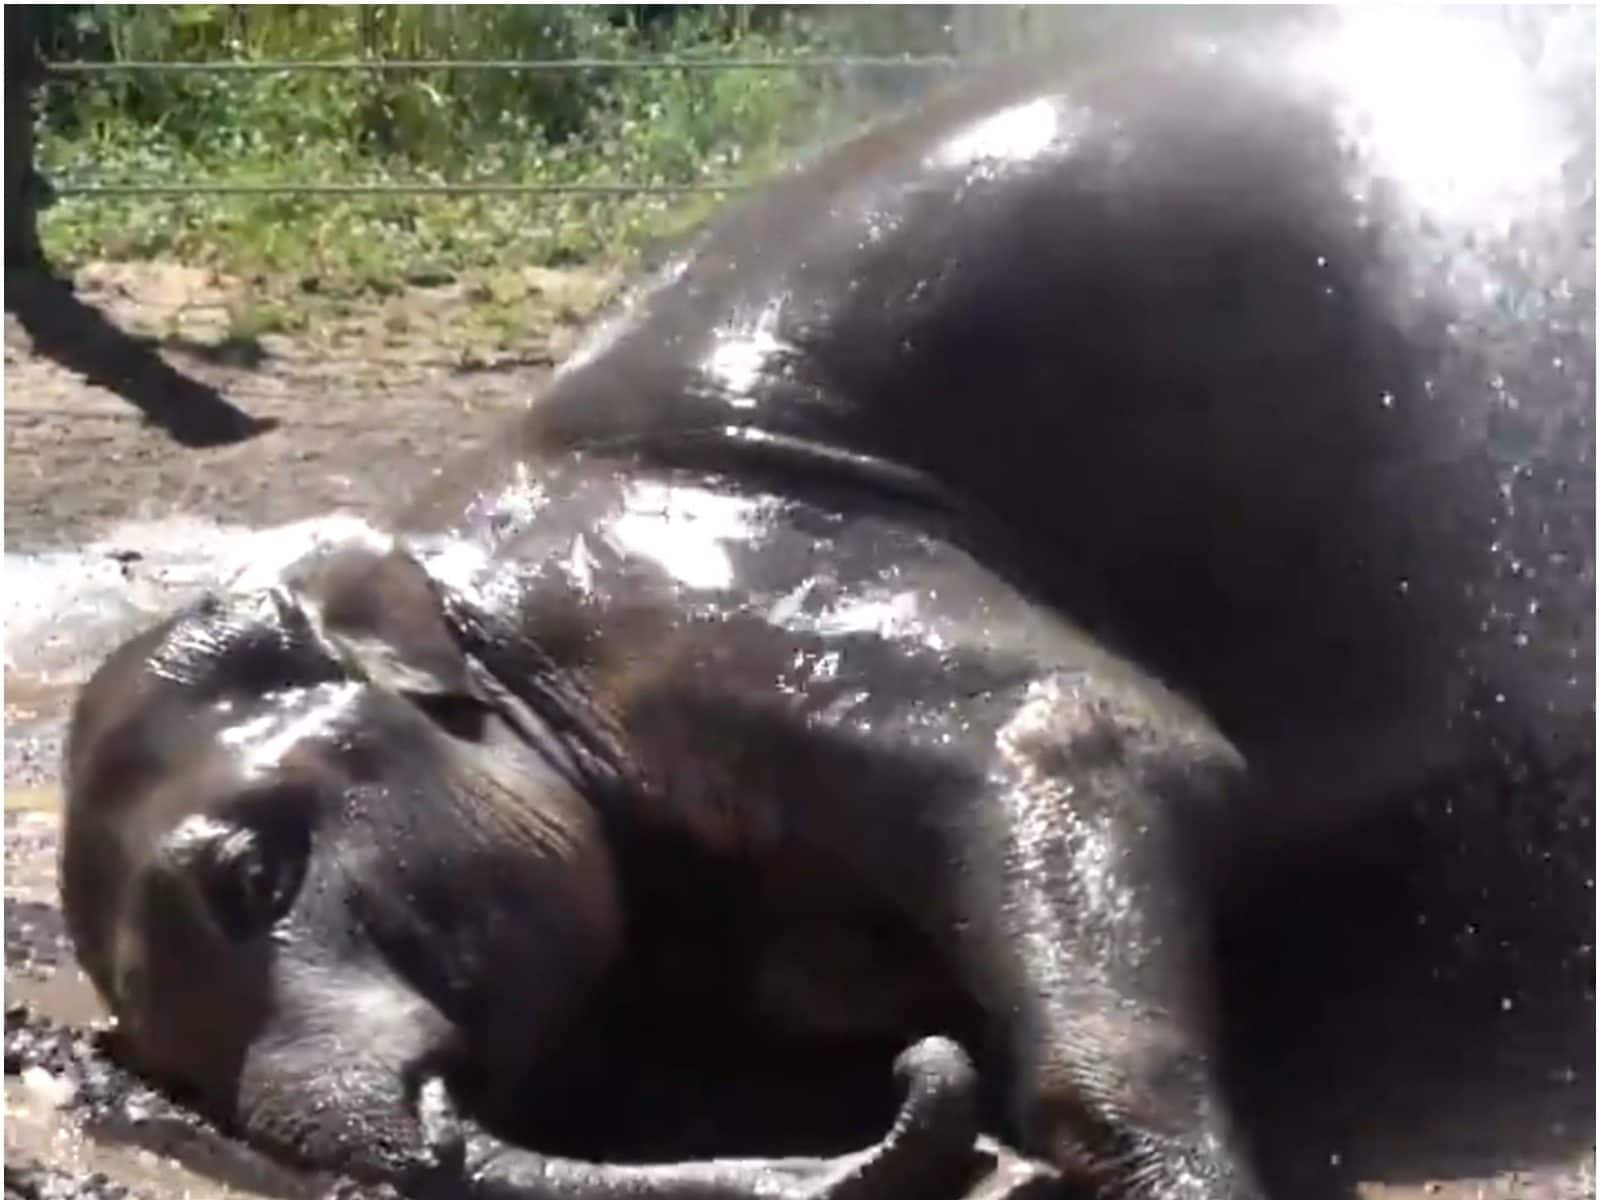 WATCH: Elephant Makes a Big Splash on Birthday With a Pool Party